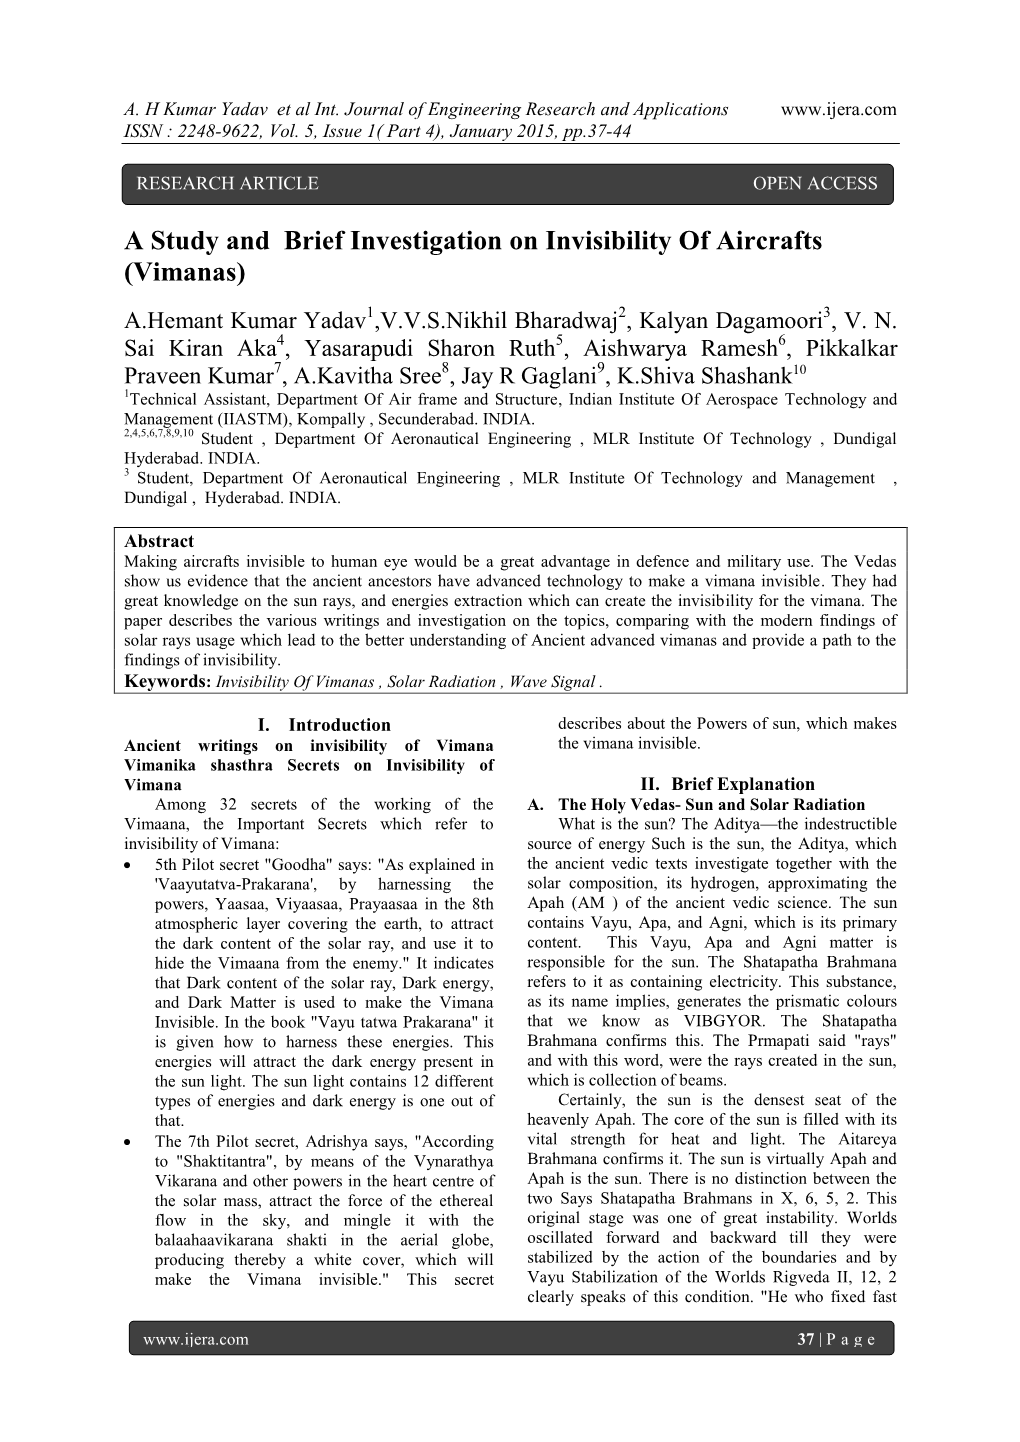 A Study and Brief Investigation on Invisibility of Aircrafts (Vimanas)